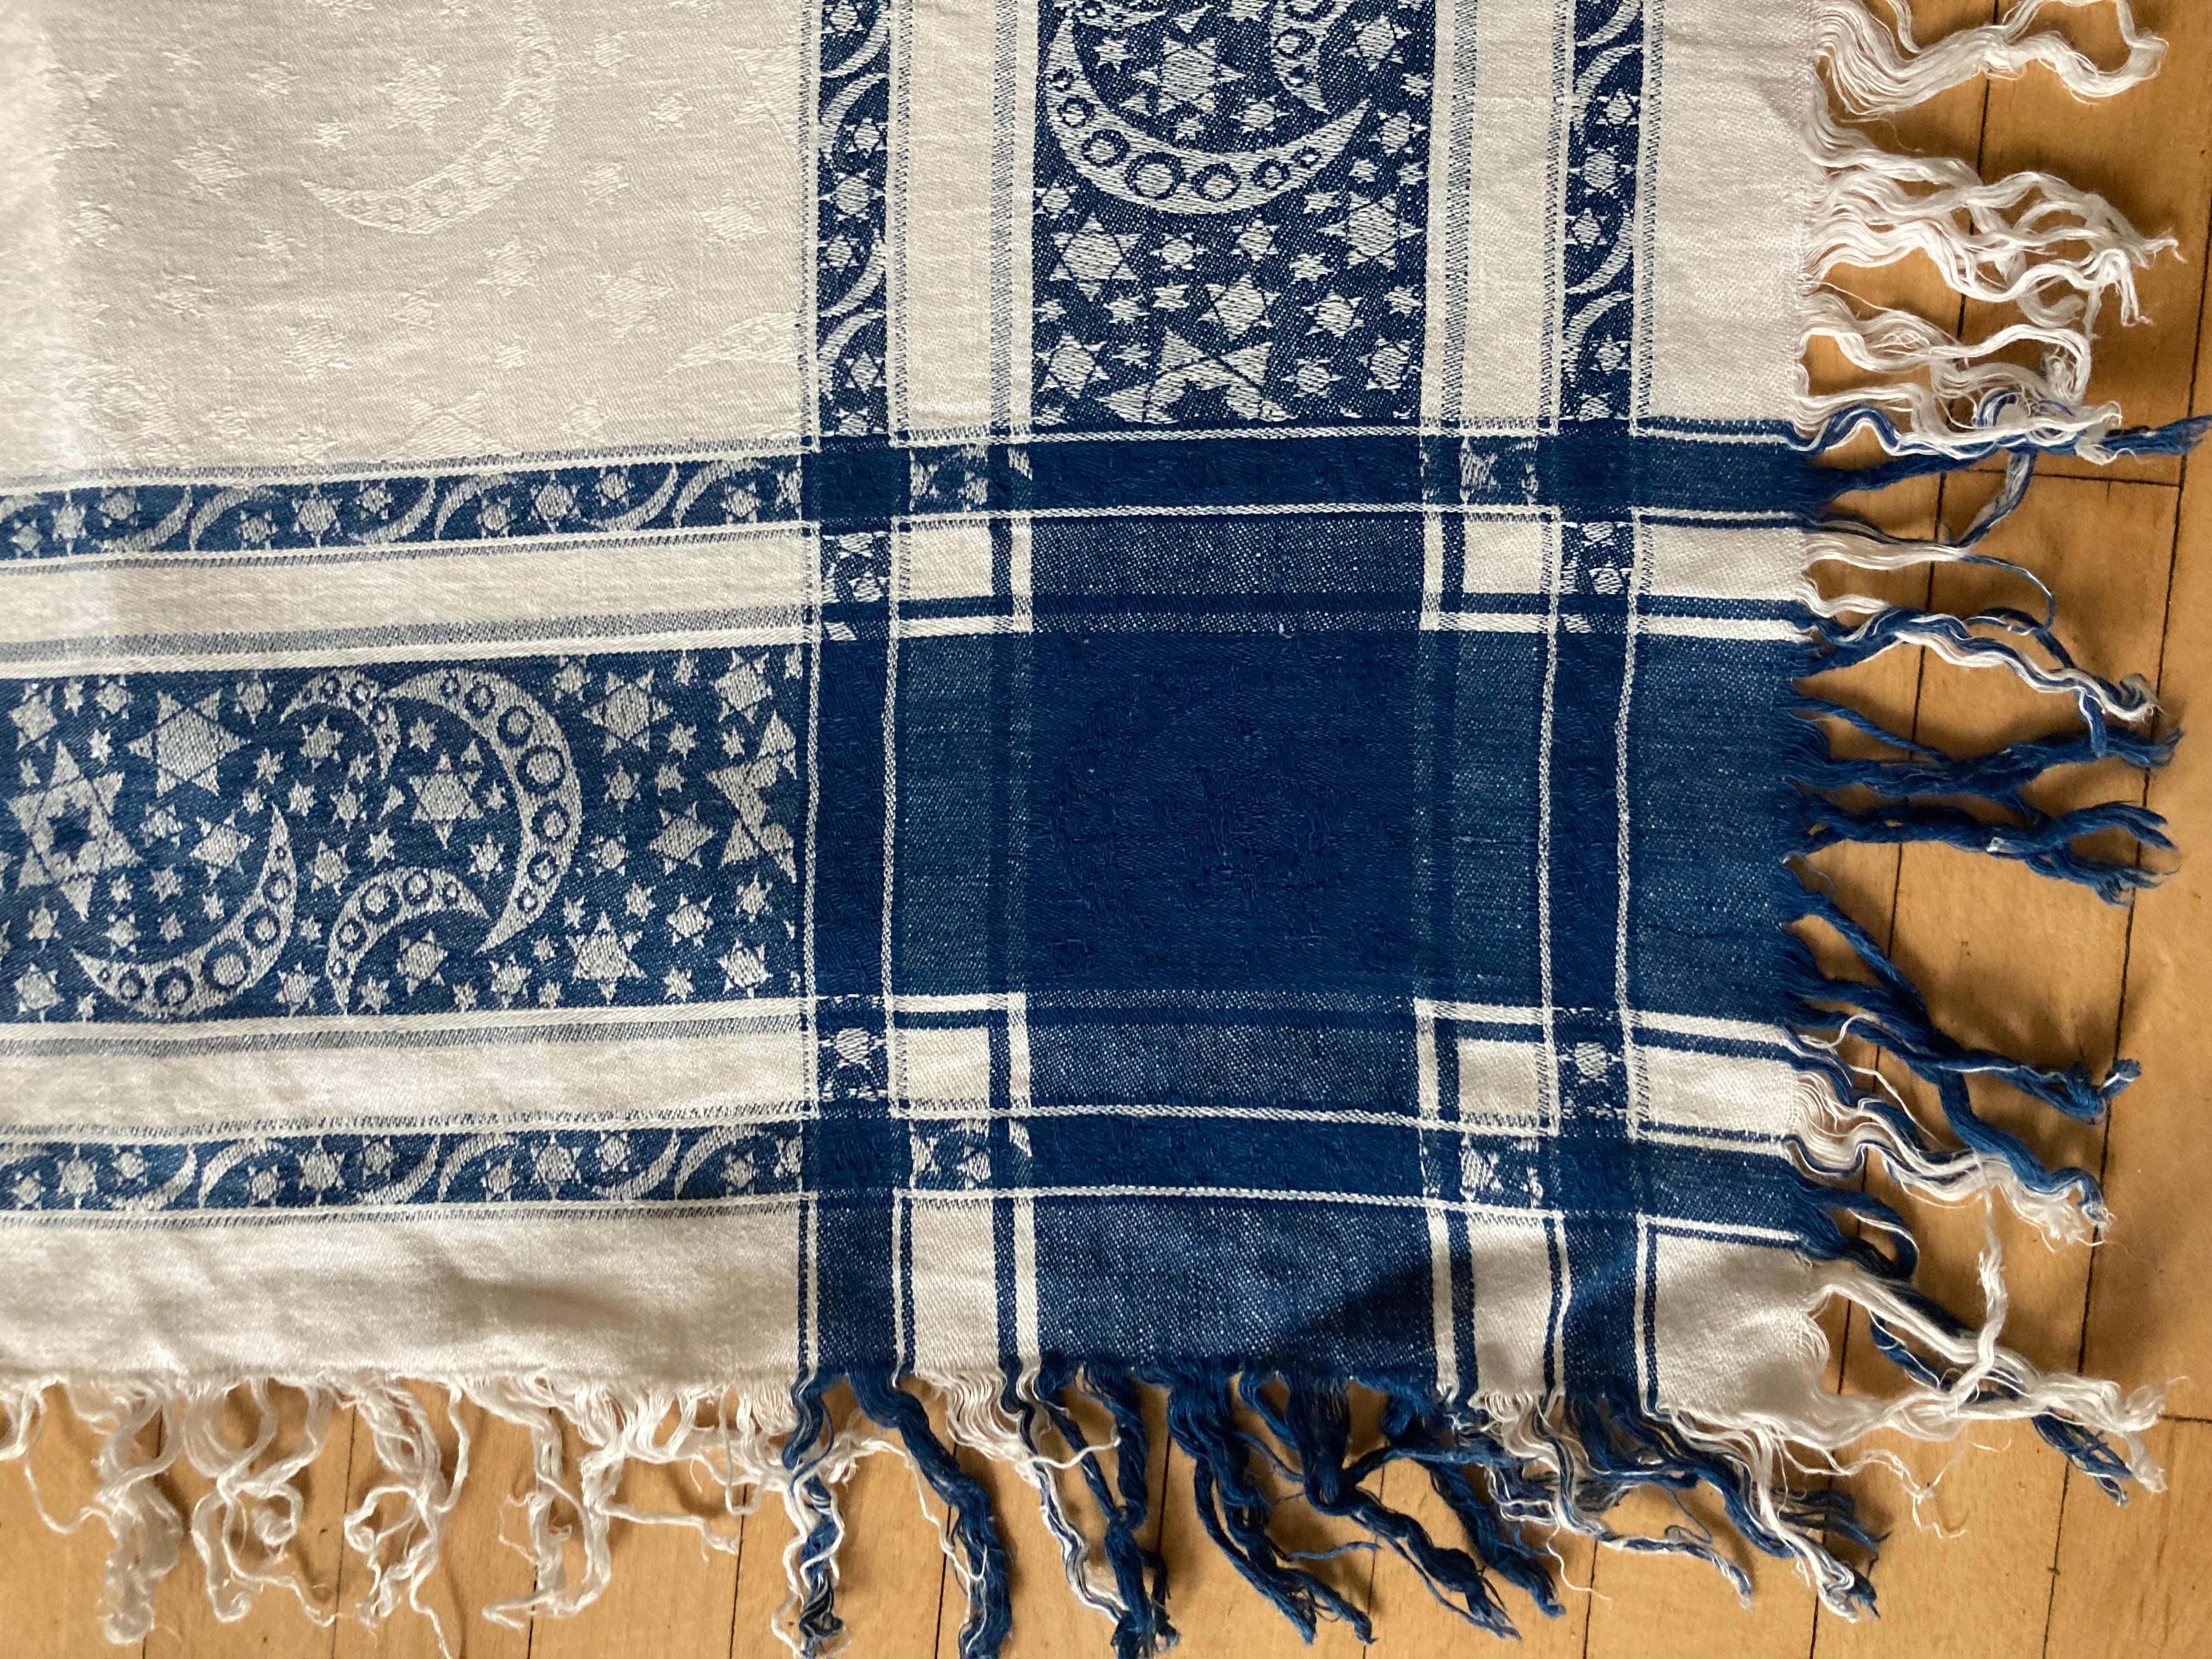 Linen Cloth Judaica with linen napkins - Other Art Style Art by Unknown